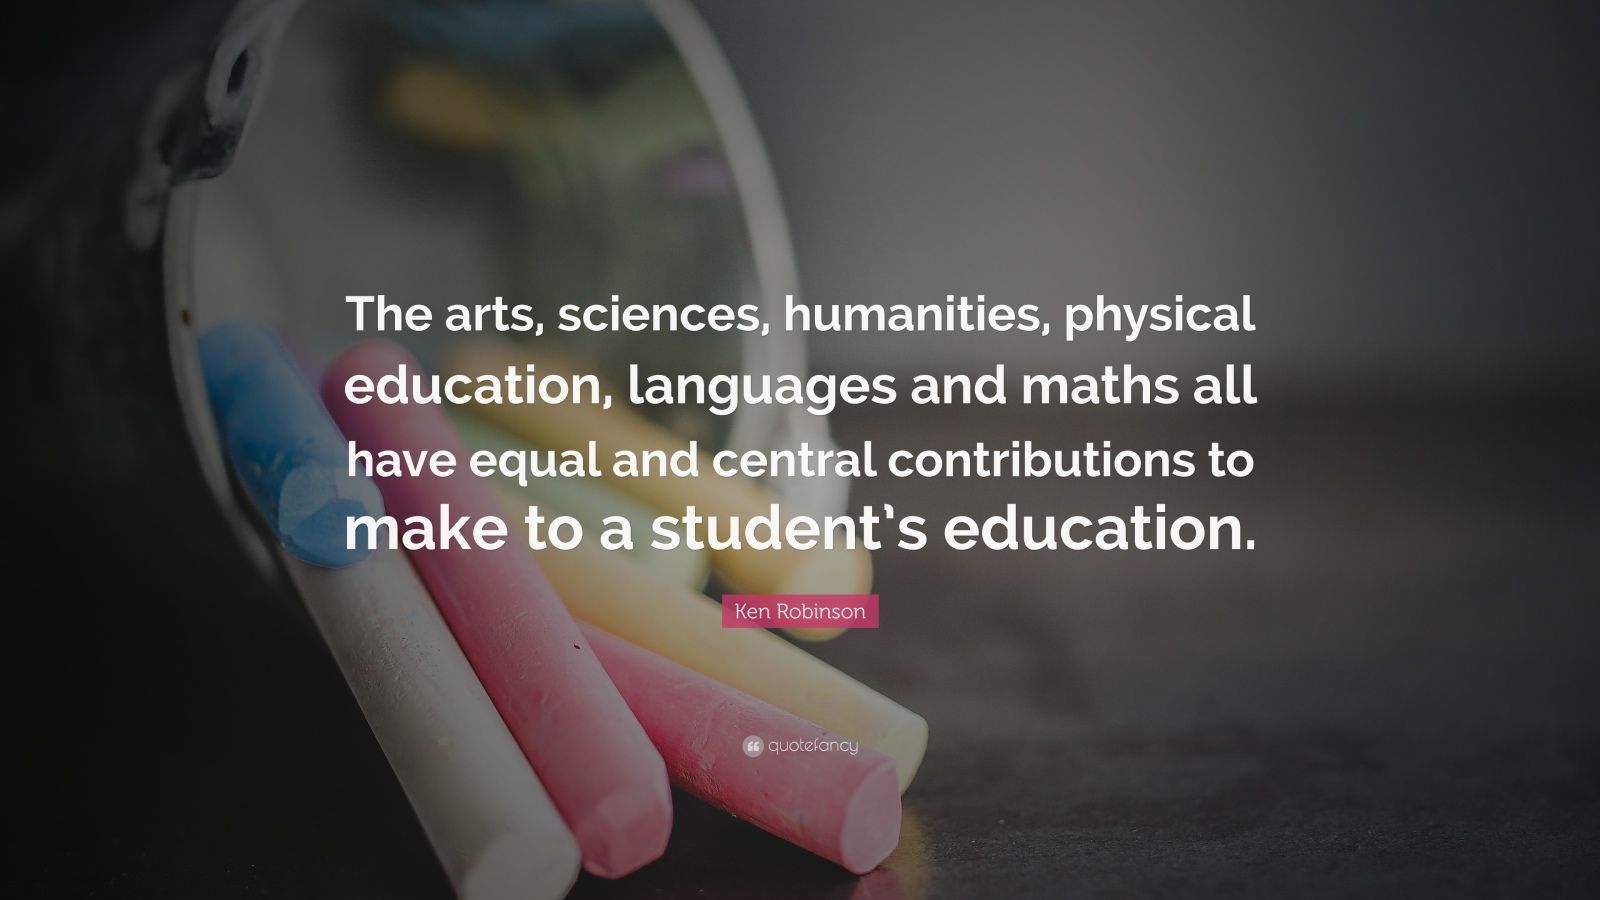 Ken Robinson Quote: “The arts, sciences, humanities, physical education, languages and maths all have equal and central contributions to make.” (7 wallpaper)